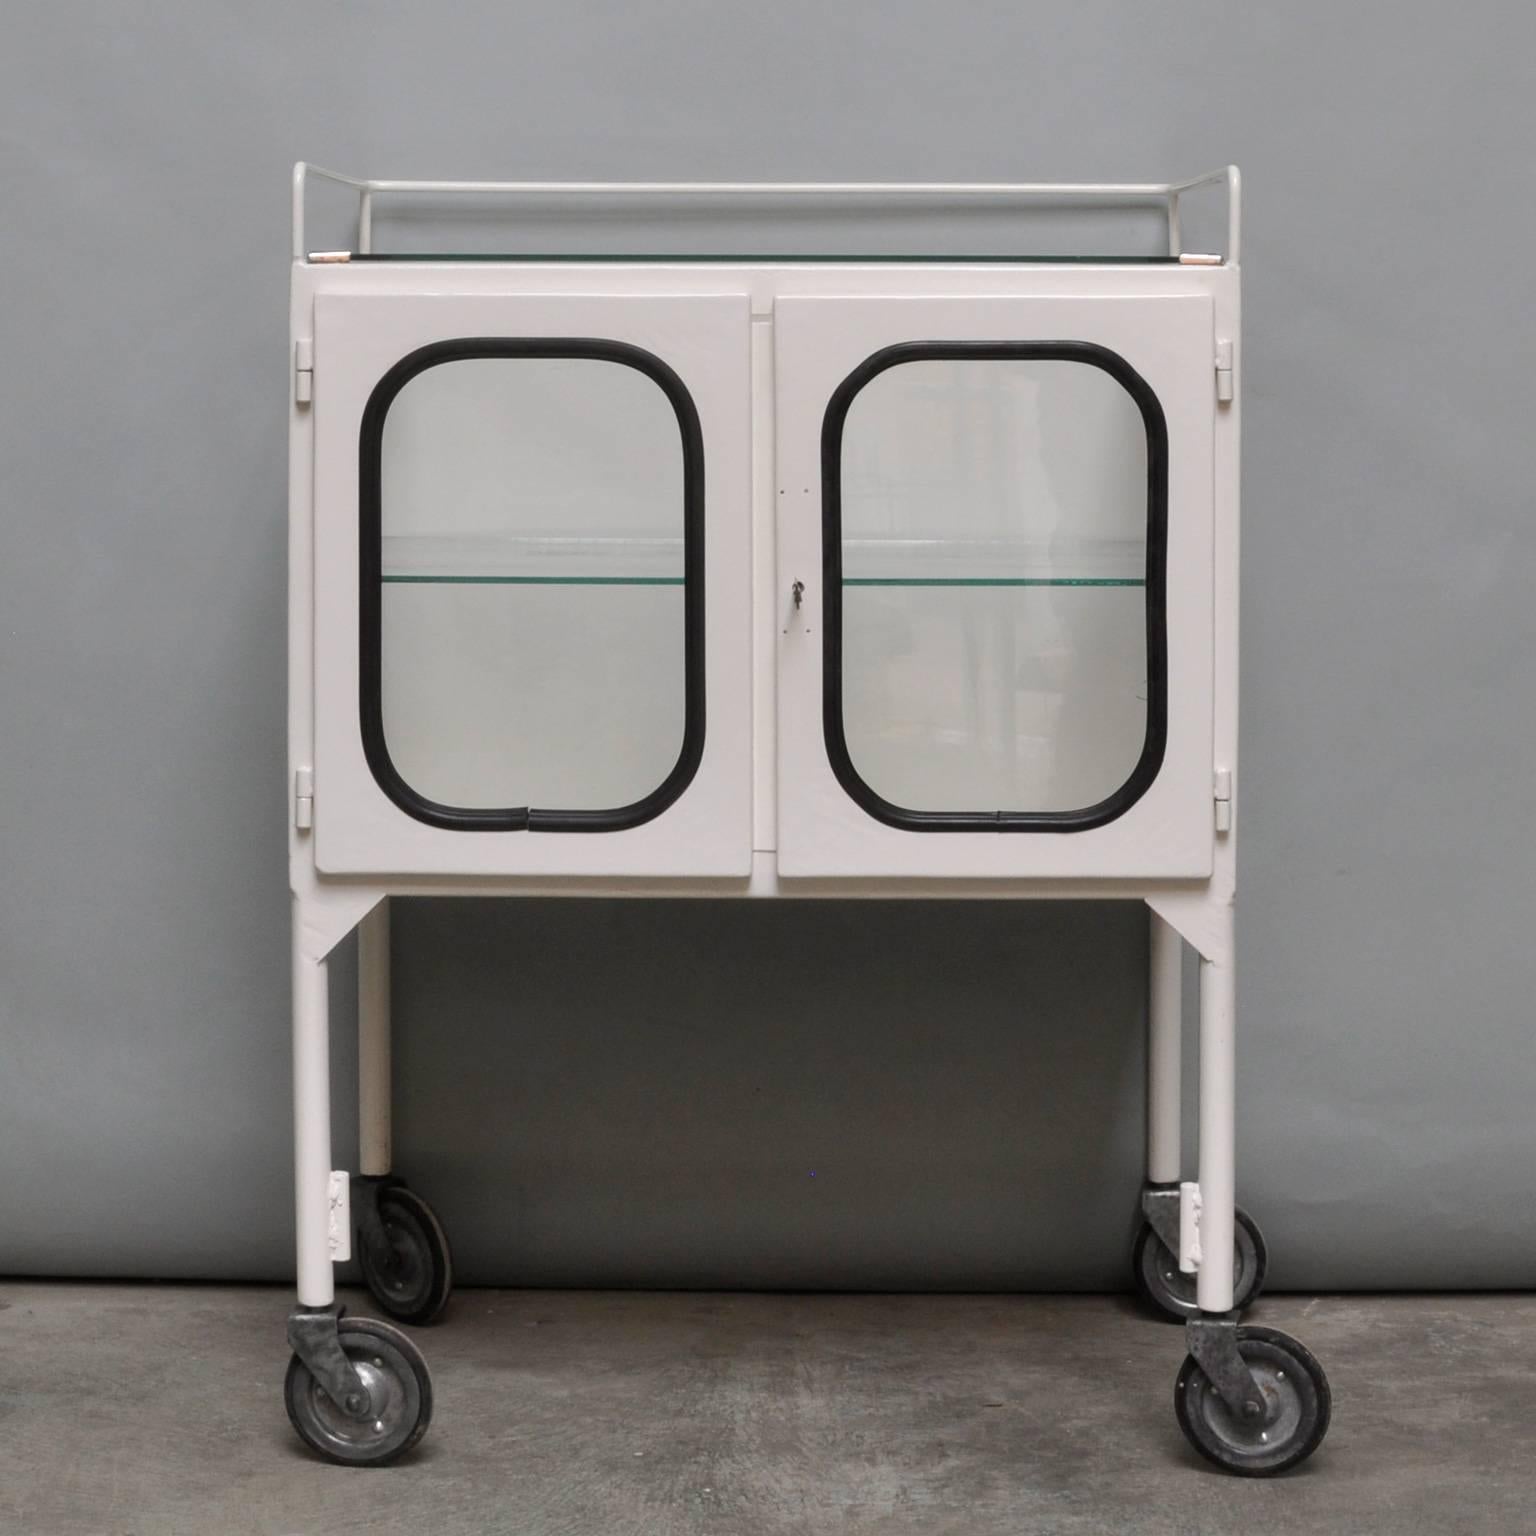 This small medicine trolley was produced in the 1970s in Hungary. It is made from steel and glass. The glass is held by a black rubber strip. The trolley comes with one glass shelve and working lock. The trolley is restored (powder coated in